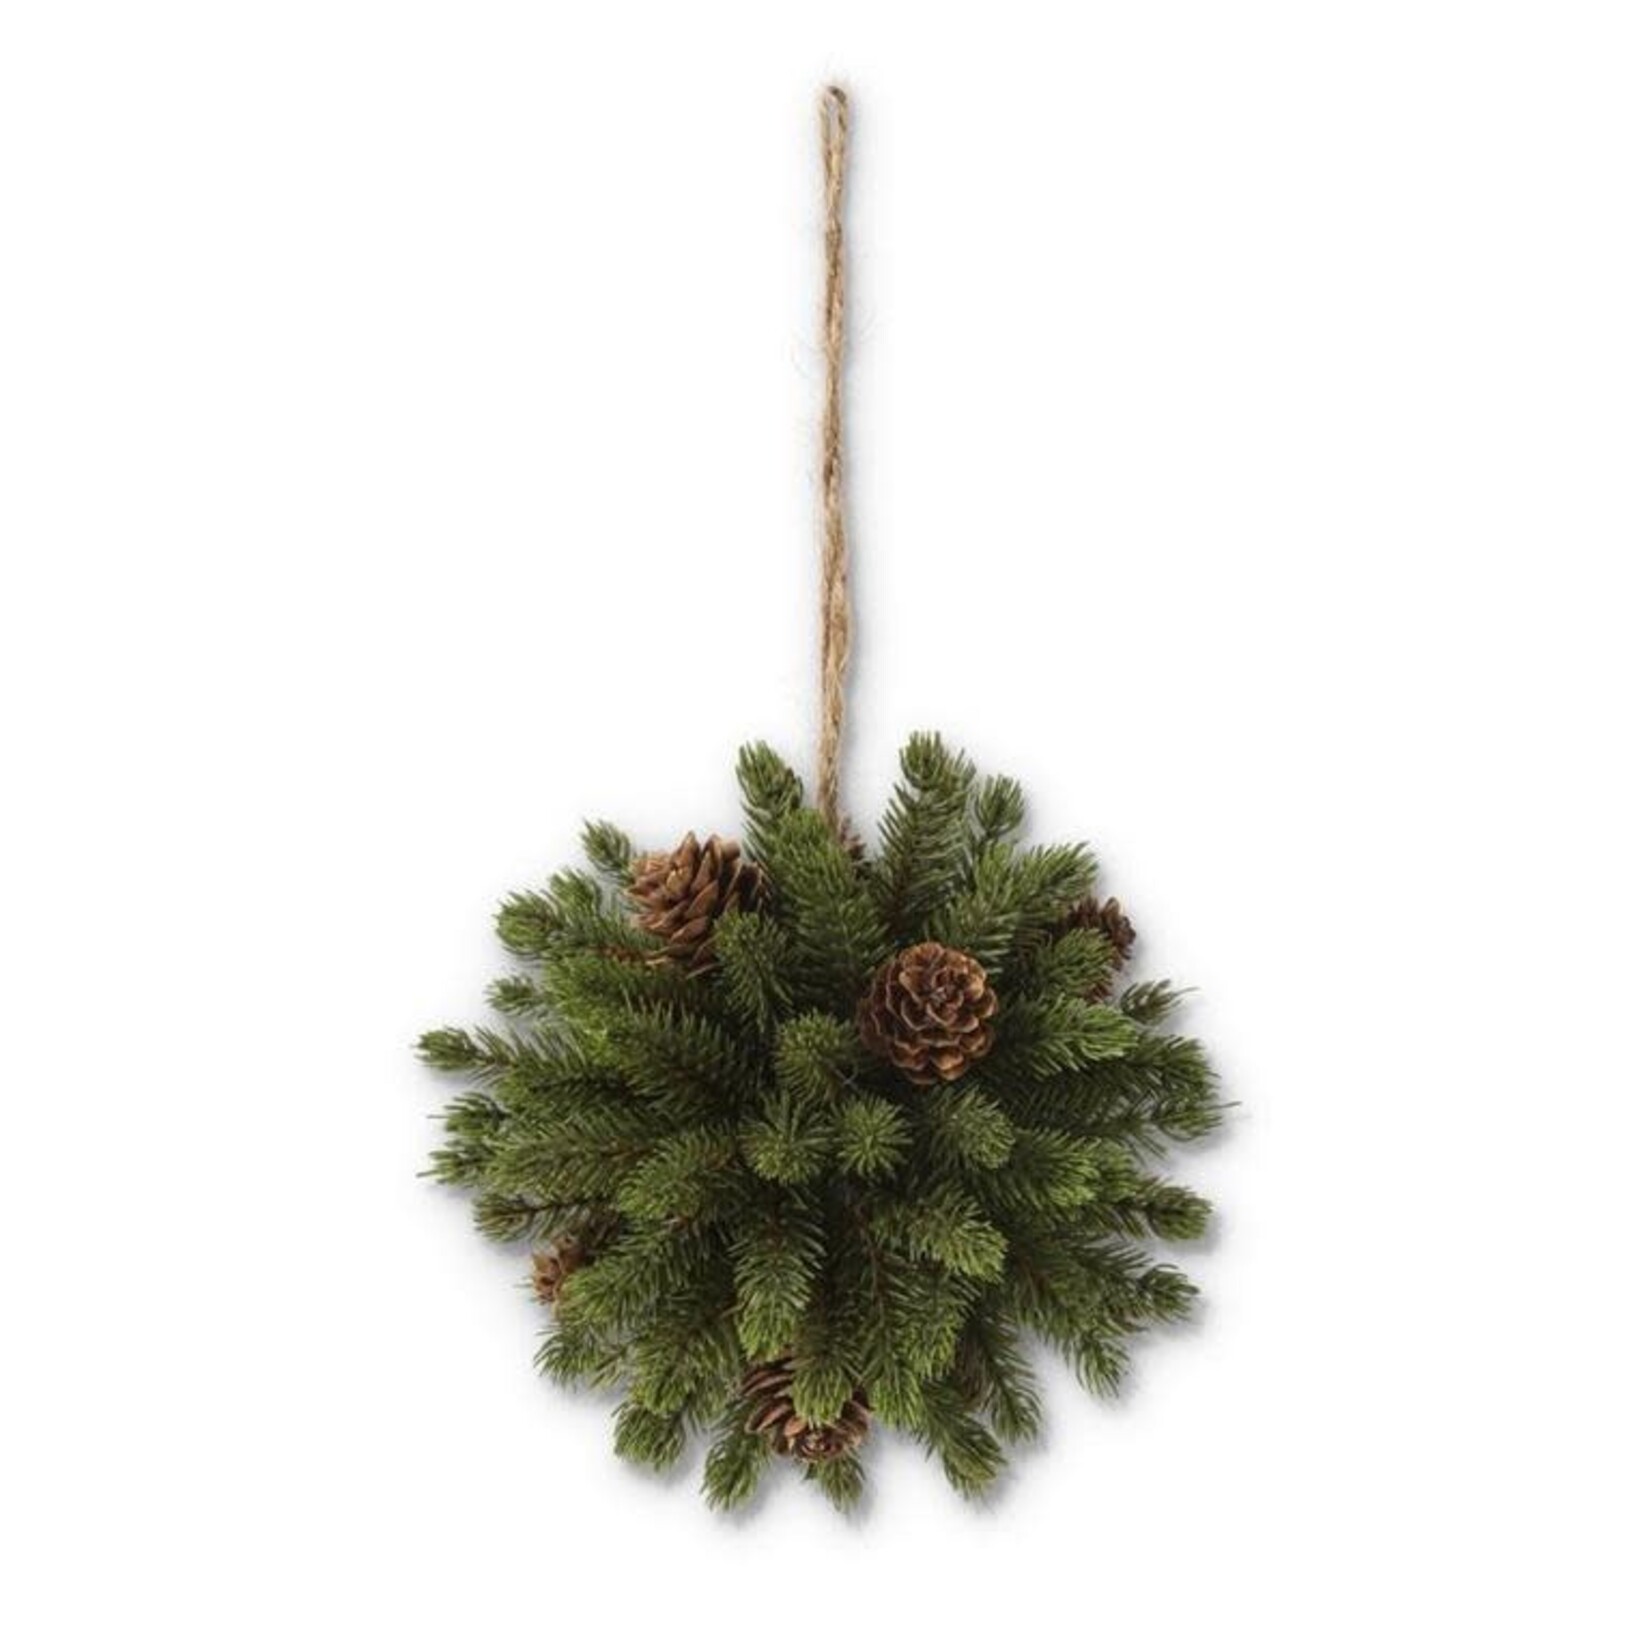 K&K 5" Angel Pine Ornament (Orb)  with Pinecones